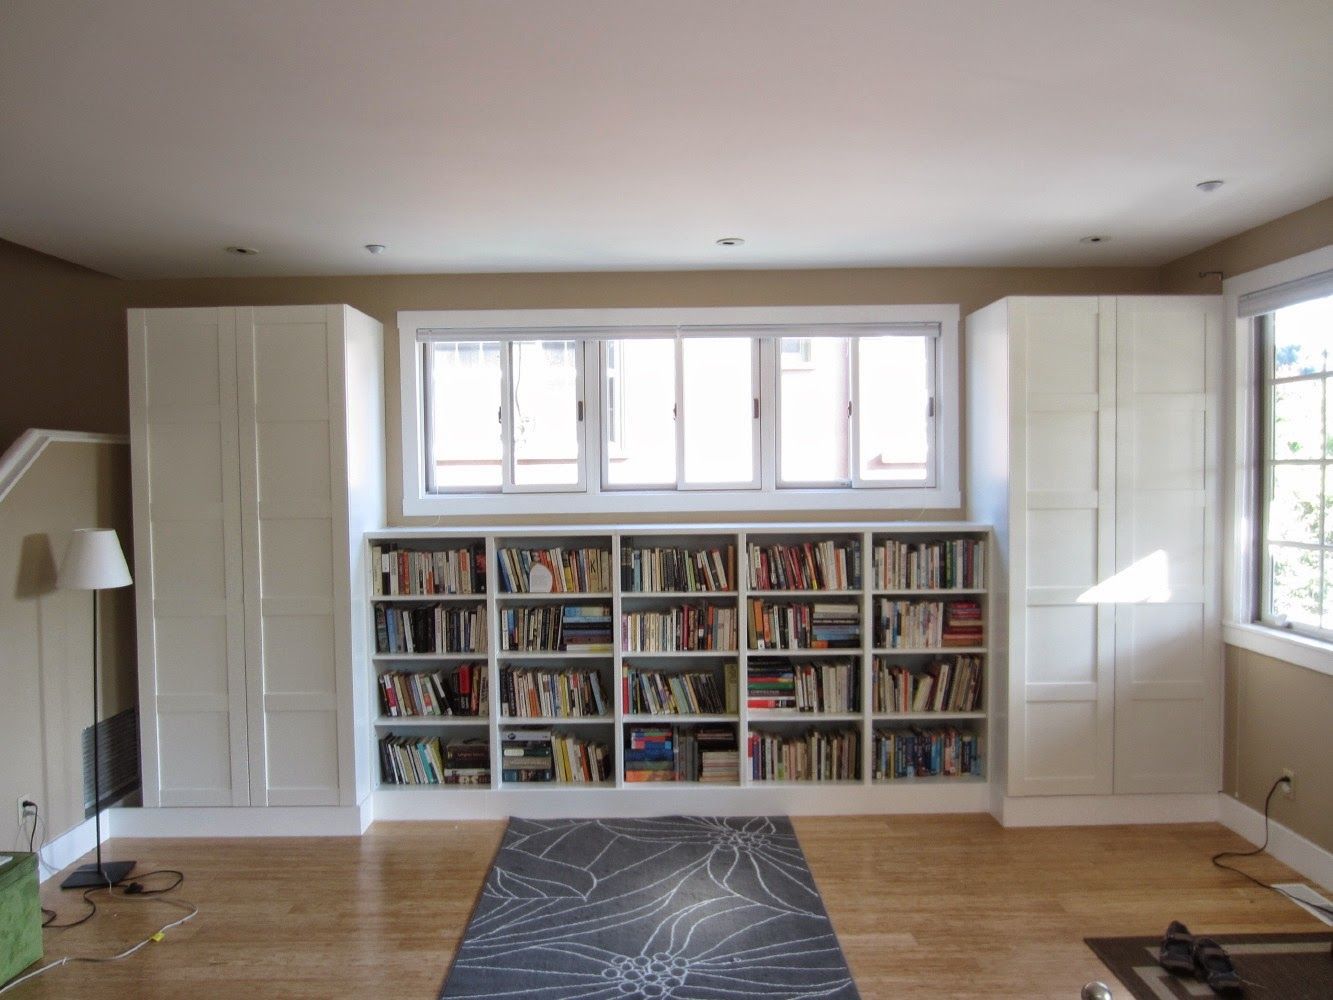 Besta Built In Family Room Bookshelf And Tv Unit Ikea Hackers Throughout Built In Bookcases With Tv (View 15 of 15)